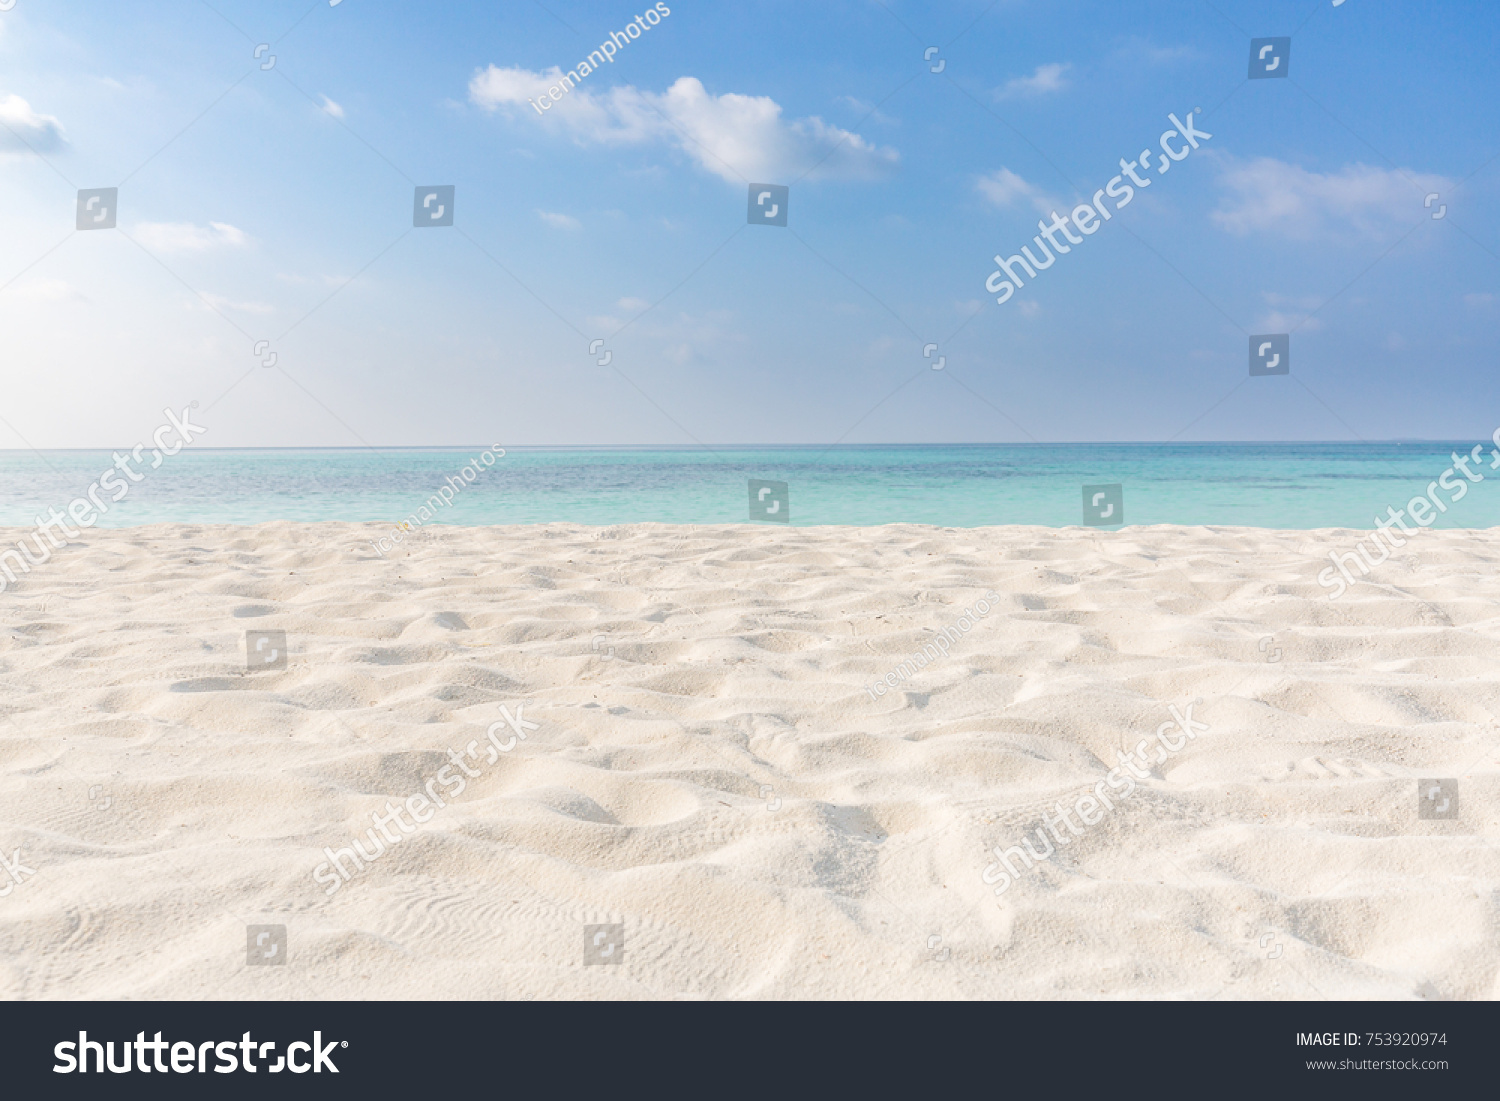 Summer beach background. Sand and sea and sky  #753920974